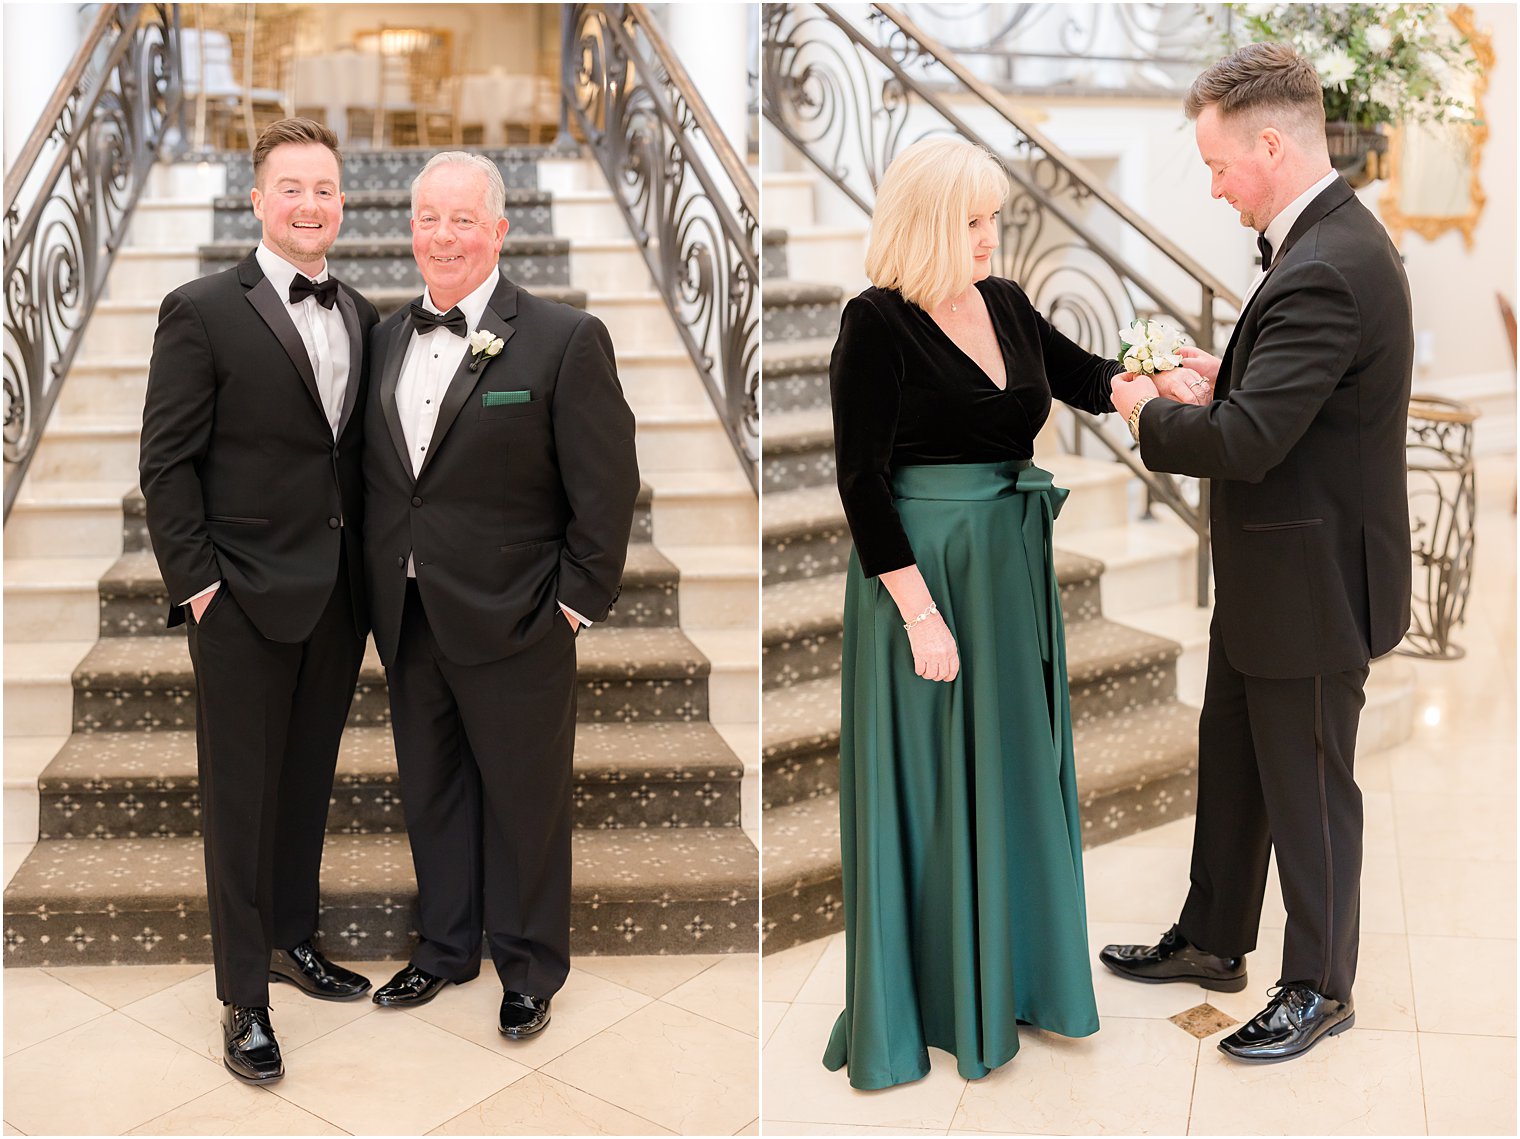 groom poses with parents and gives mother corsage 